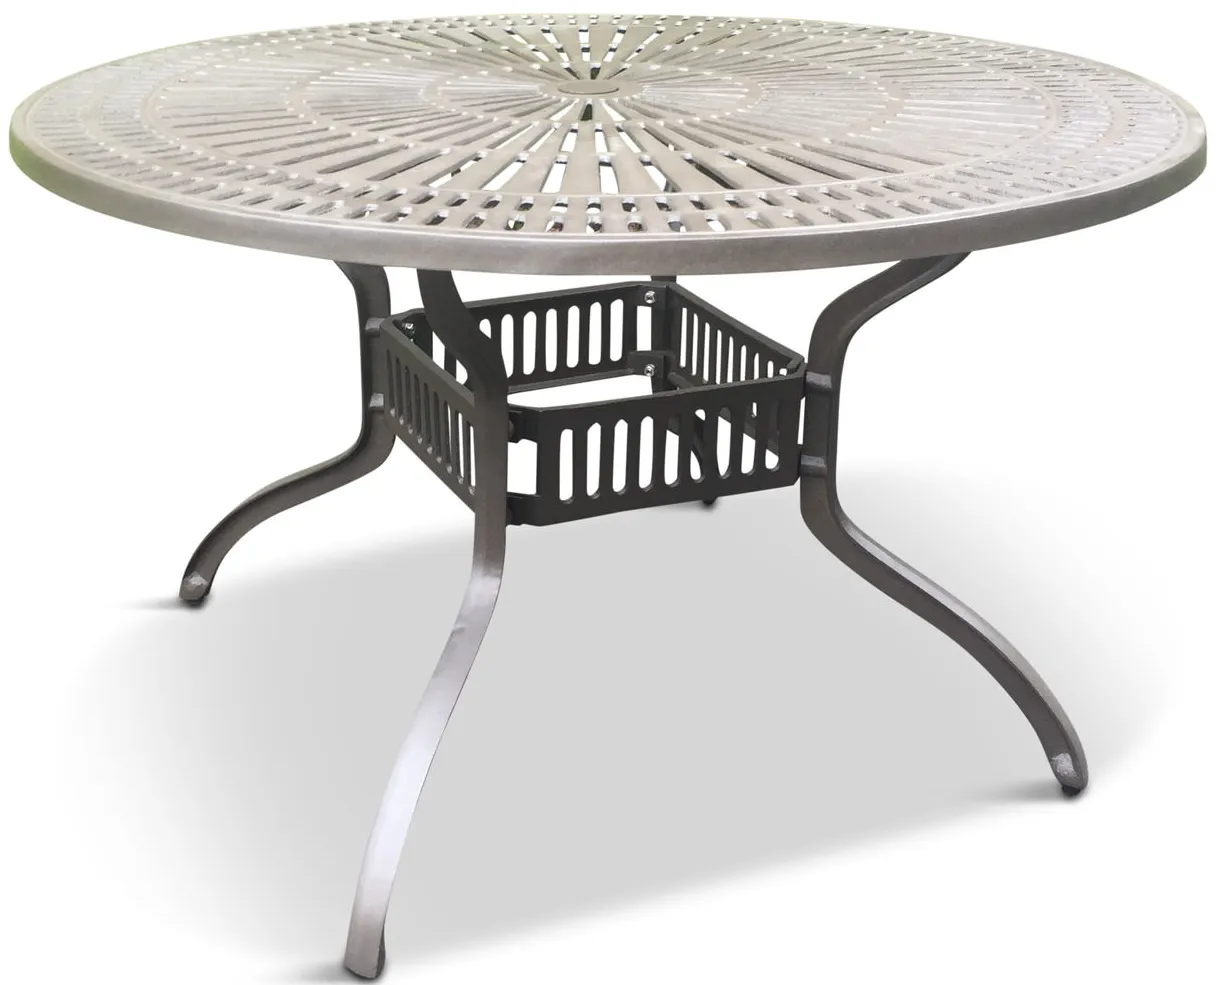 Orleans Round Dining Table